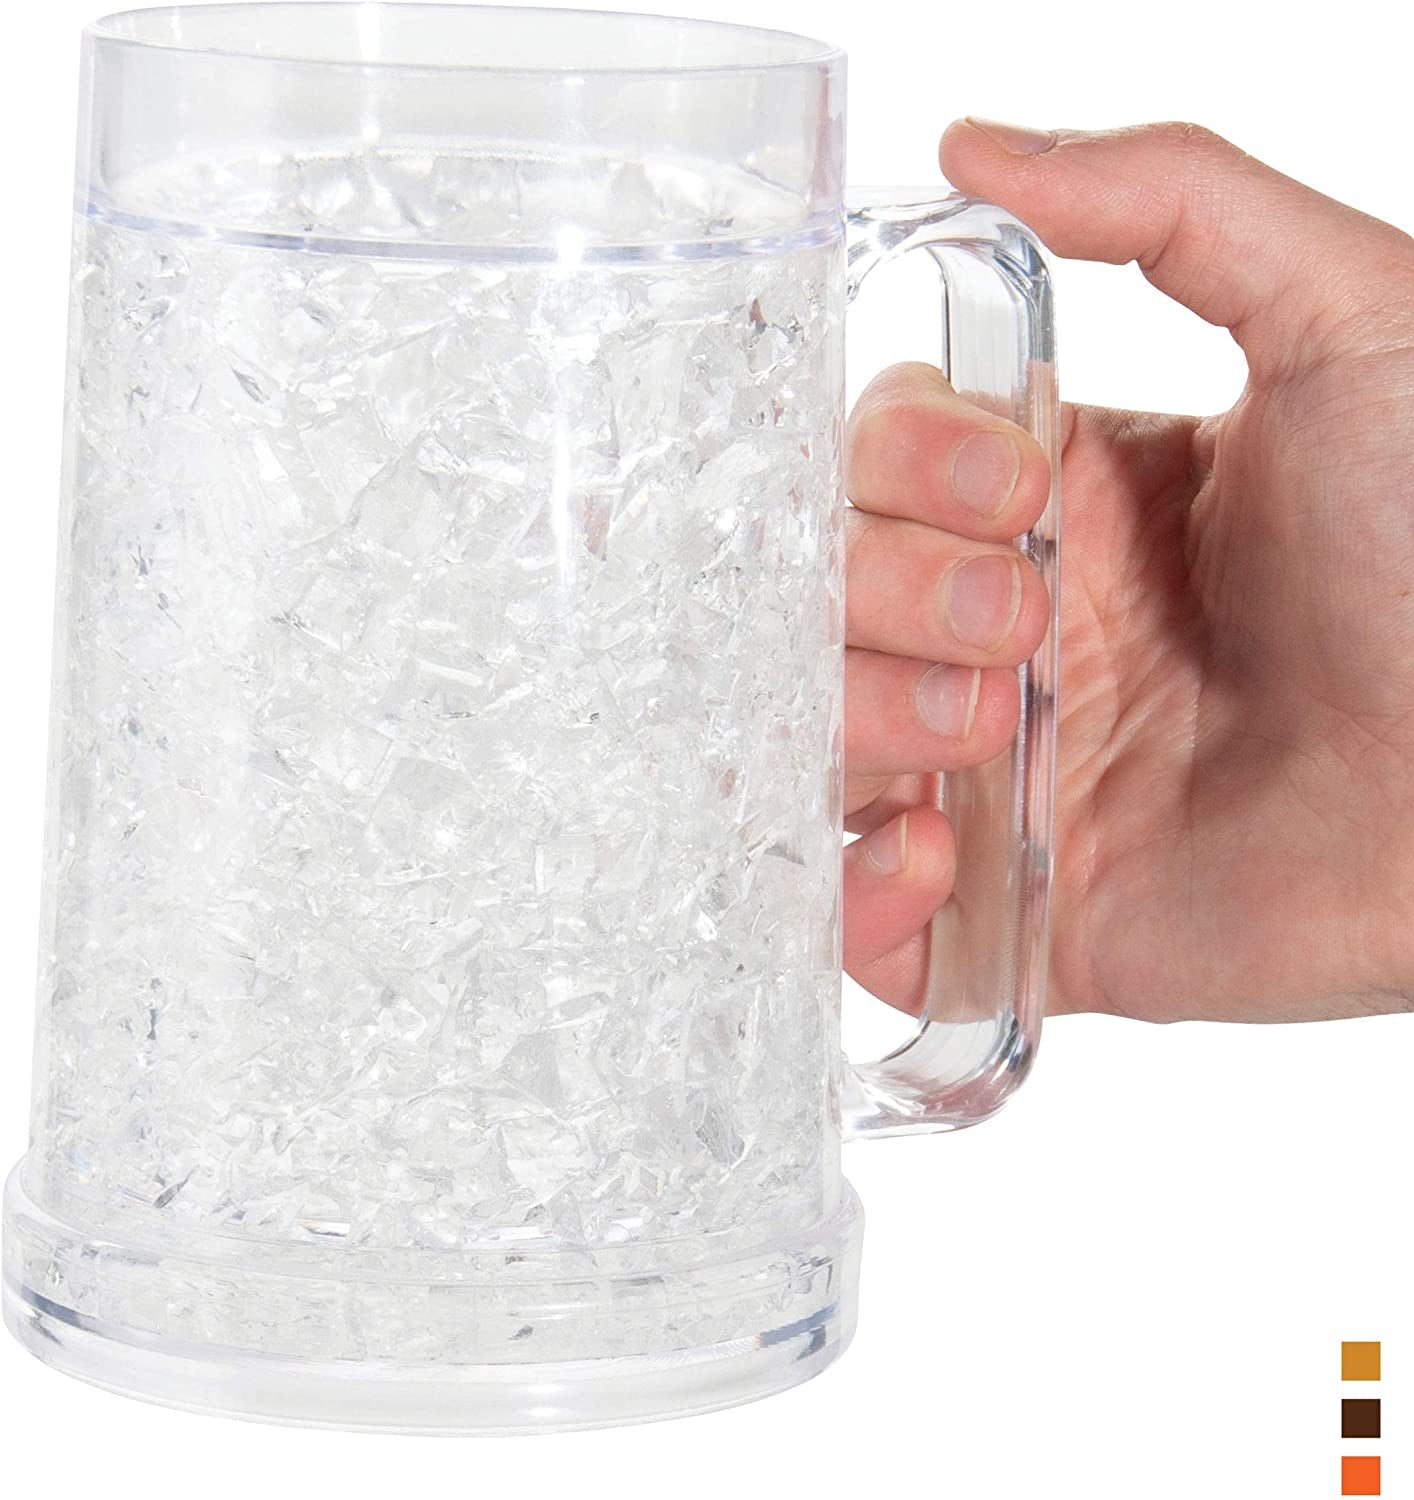 Freezer Beer Mugs, Double Wall, Insulated Gel Plastic Pint Freezable Glasses, 16 Oz, Clear 2 Pack , Chiller Frosty Cup, Frozen Ice Freezer Mug, Freezer Cups